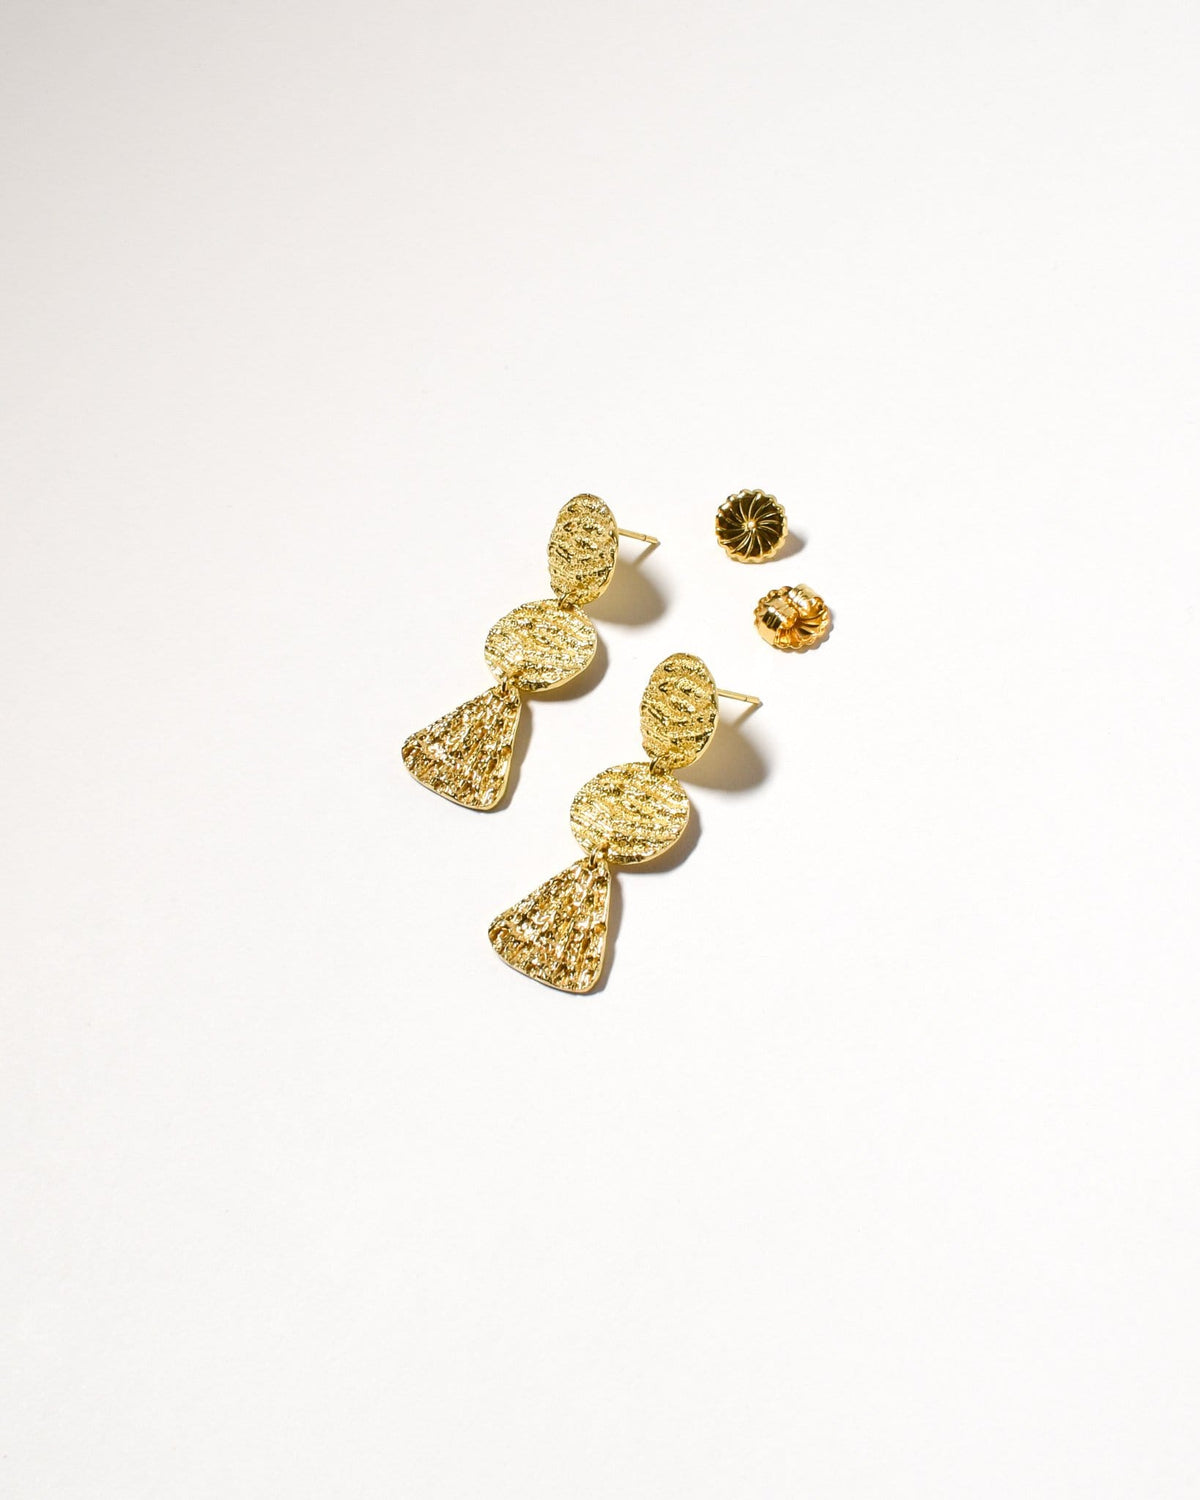 Coogee Earrings (Short), Yellow Gold Plated